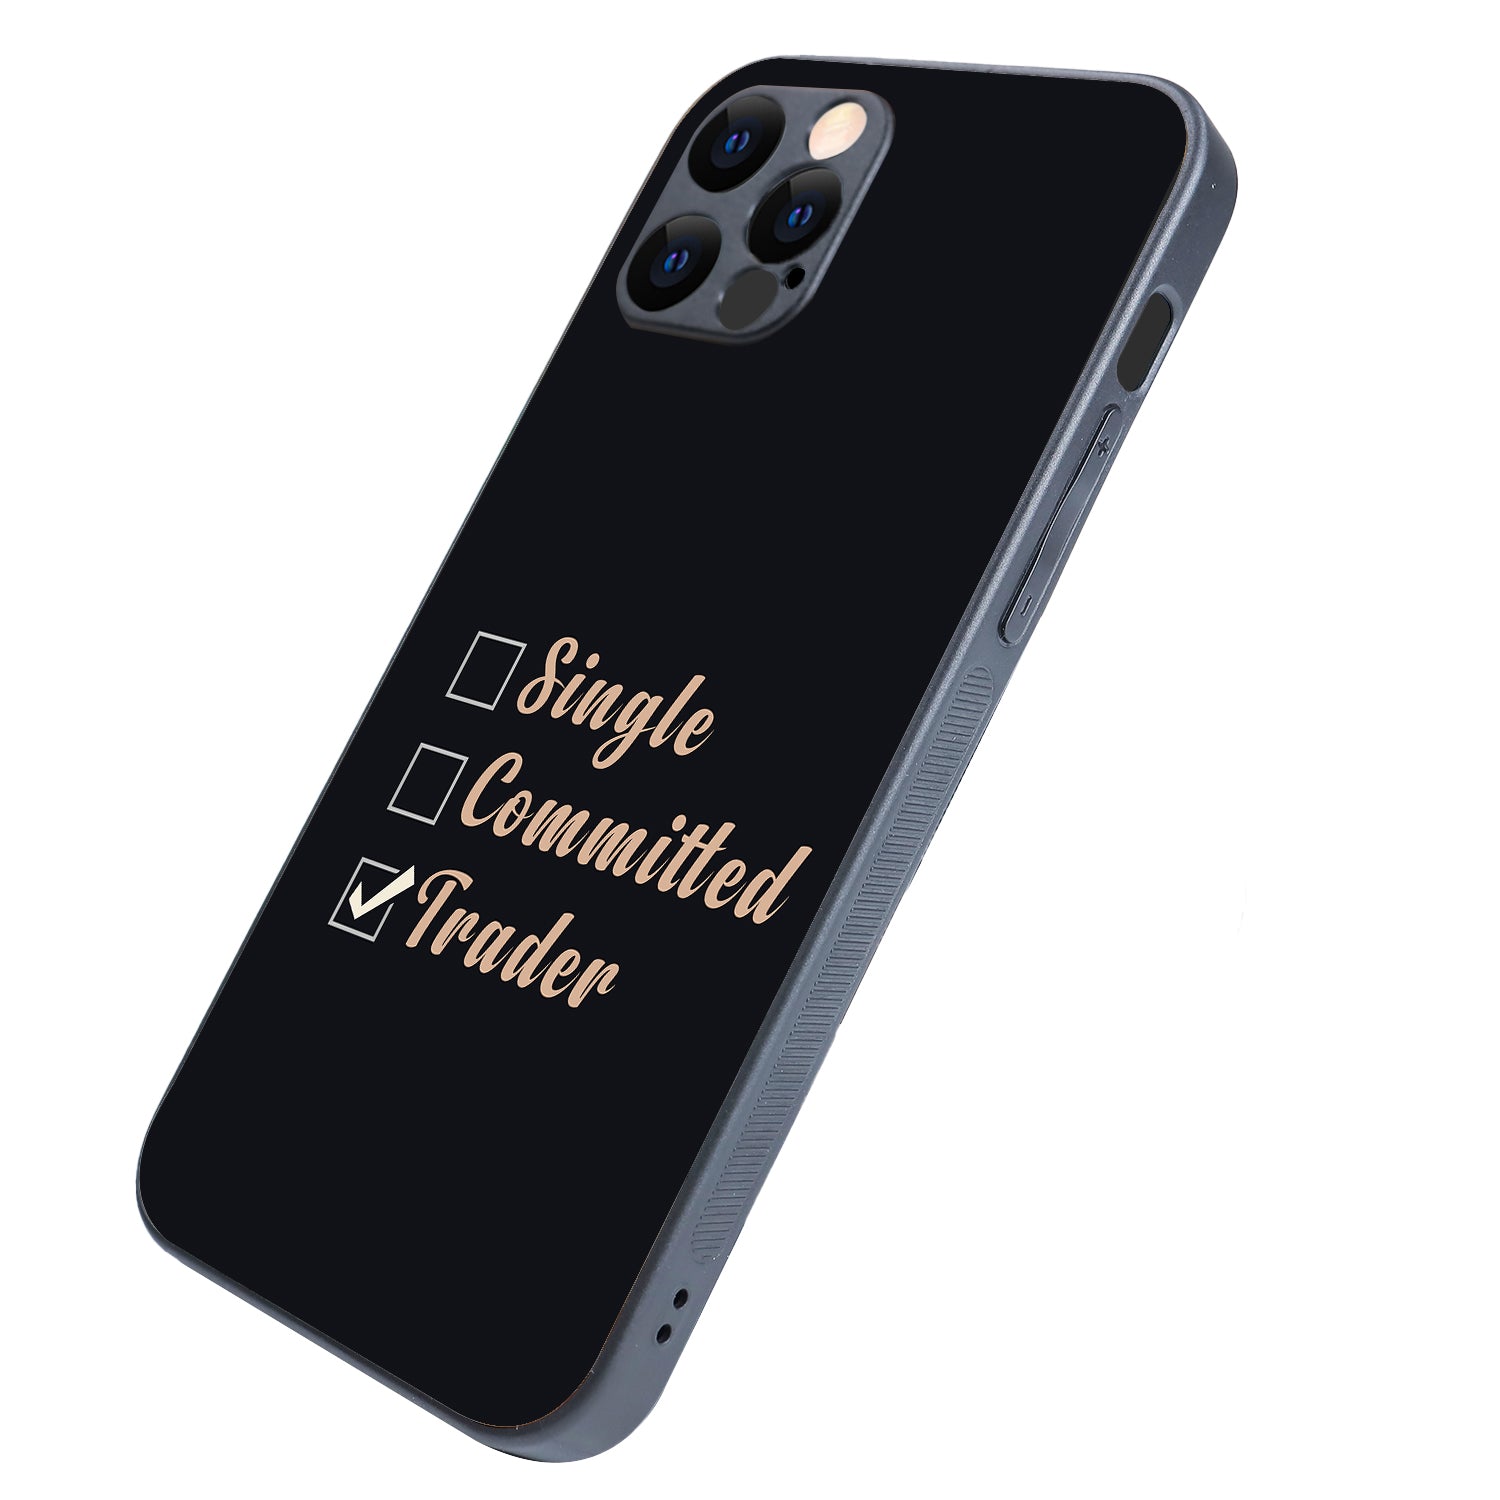 Single, Commited, Trader Trading iPhone 12 Pro Case